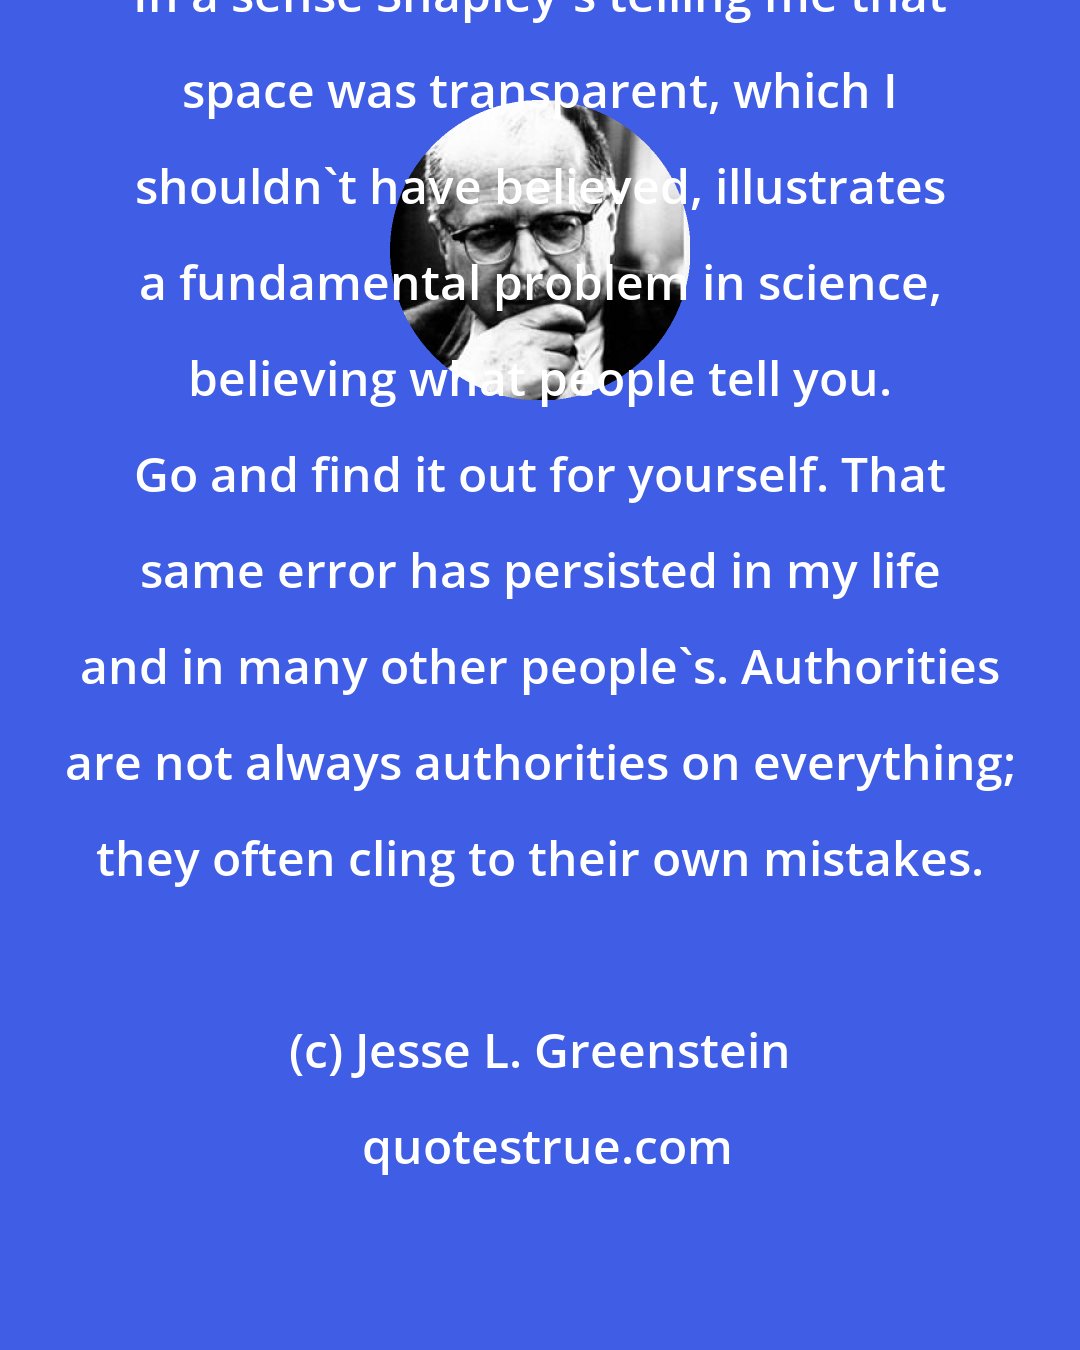 Jesse L. Greenstein: In a sense Shapley's telling me that space was transparent, which I shouldn't have believed, illustrates a fundamental problem in science, believing what people tell you. Go and find it out for yourself. That same error has persisted in my life and in many other people's. Authorities are not always authorities on everything; they often cling to their own mistakes.